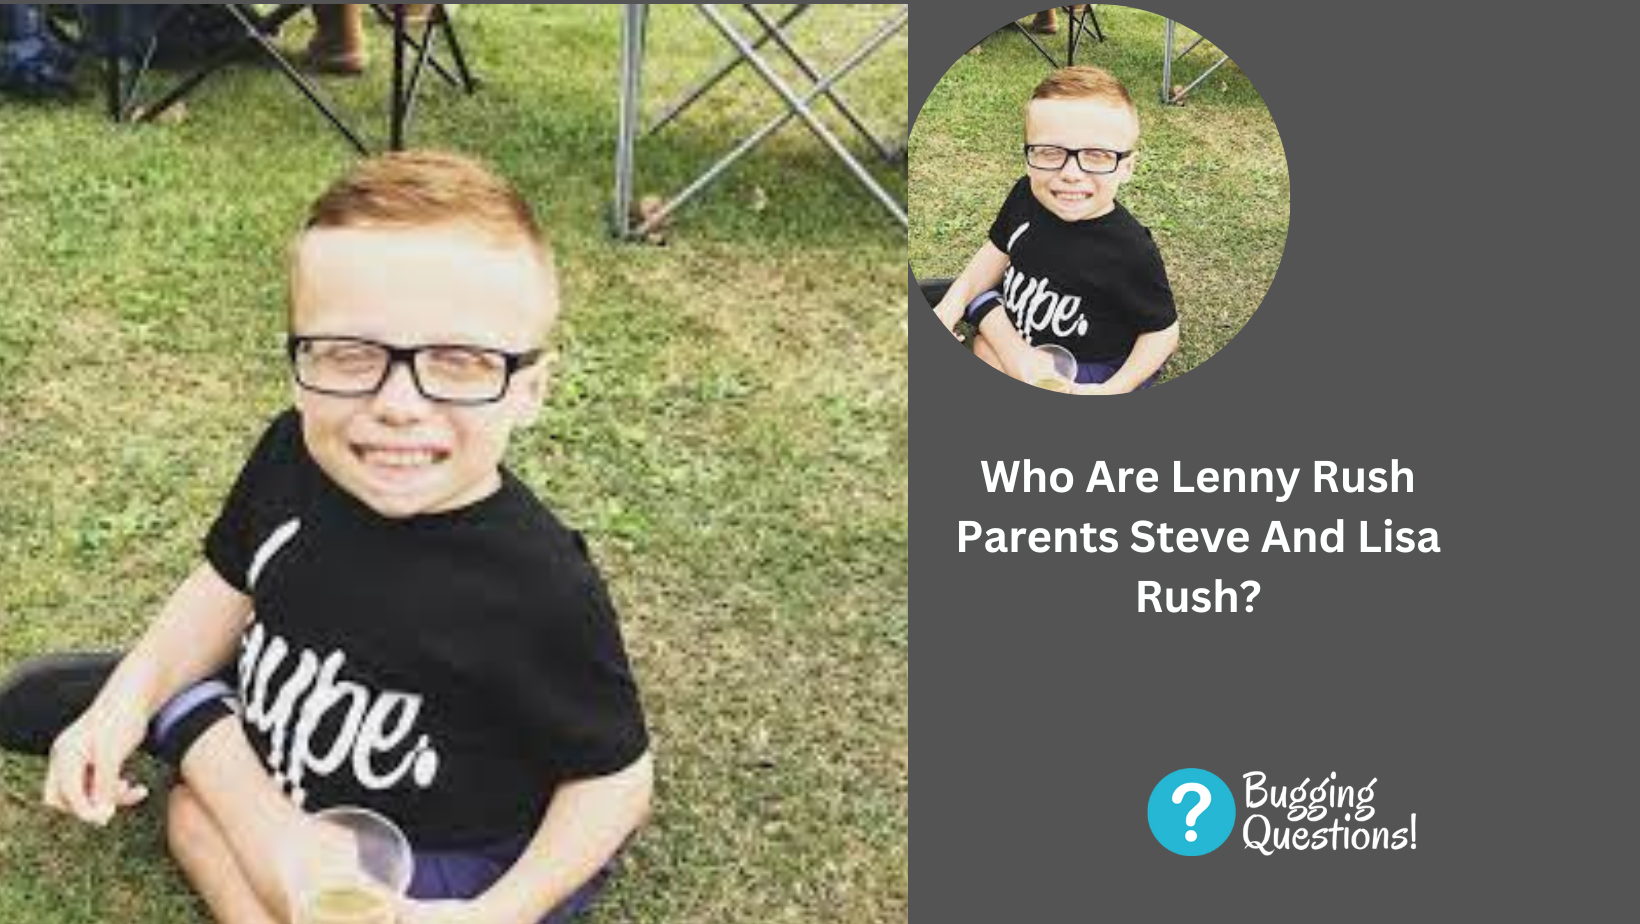 Who Are Lenny Rush Parents Steve And Lisa Rush?